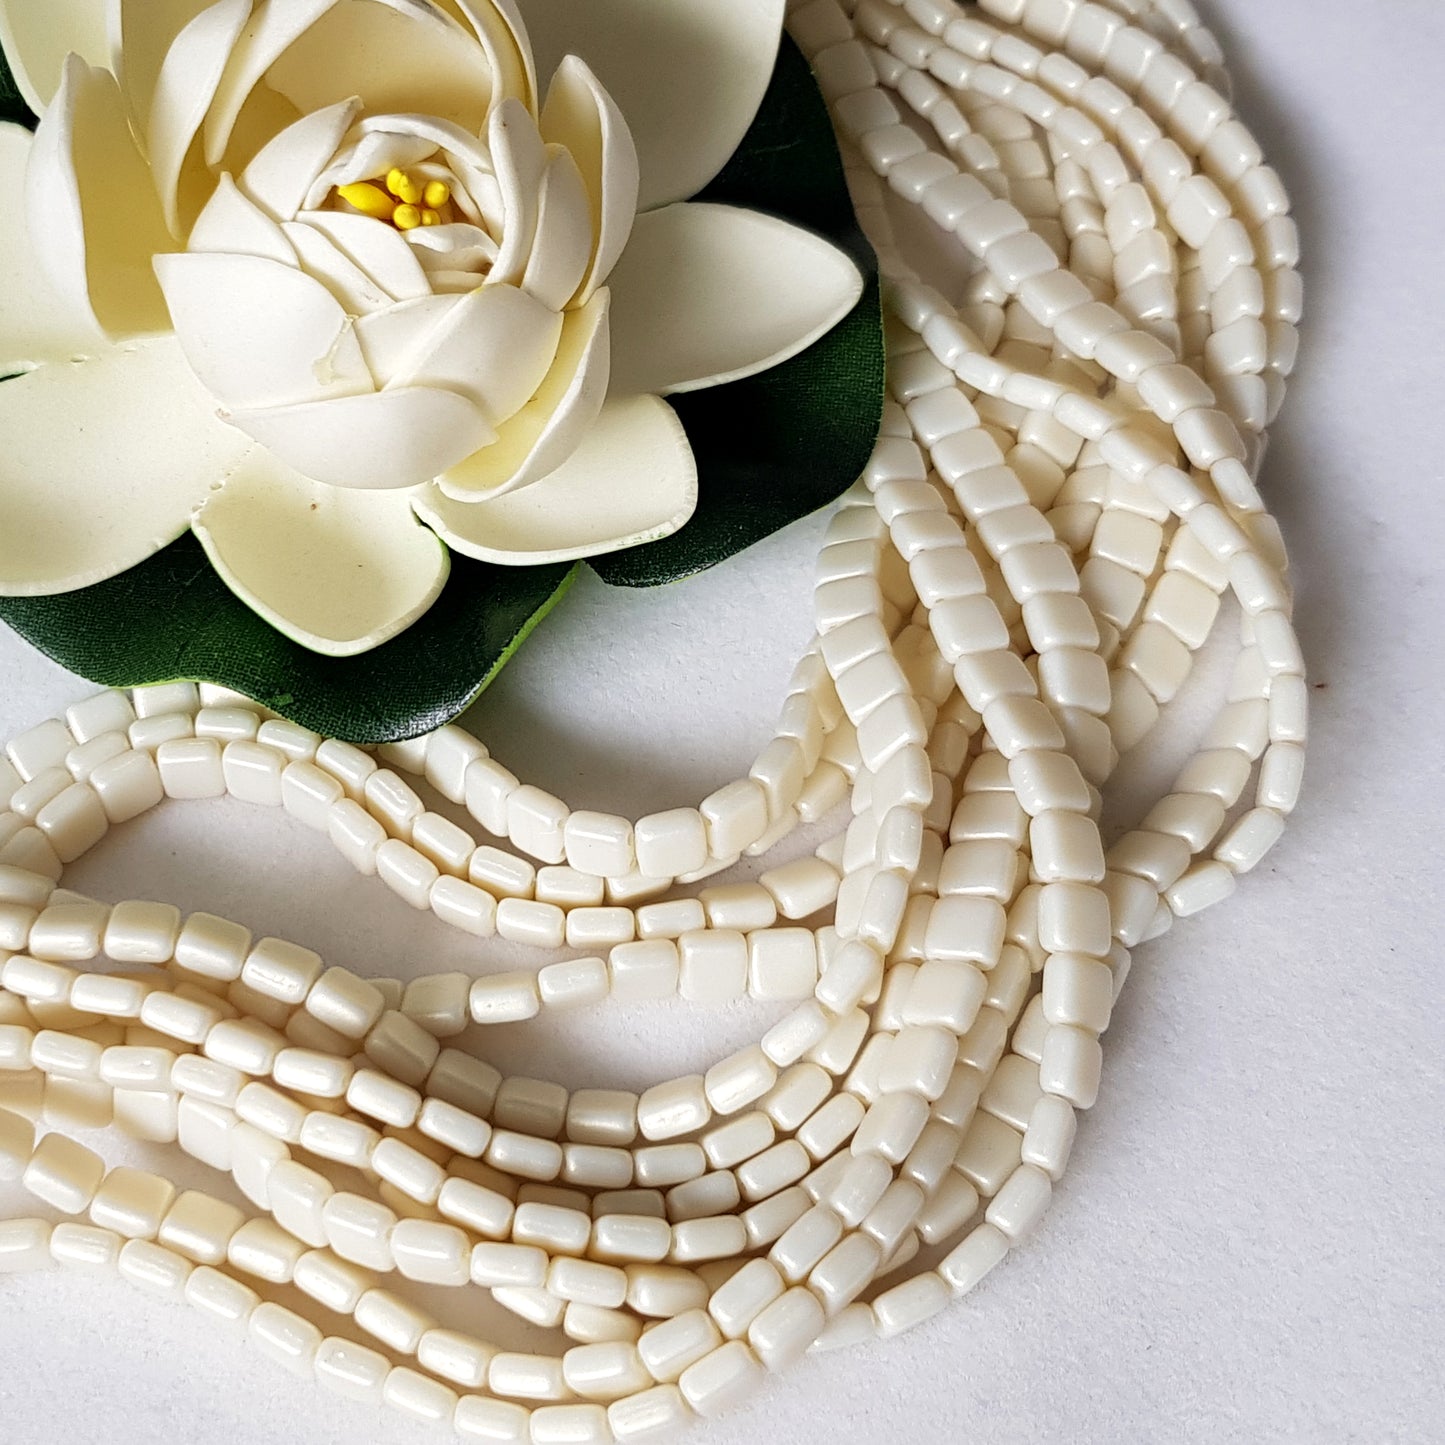 Tile Ivory Sueded Gold 6mm CzechMate Beads | CZMTile-MSG83529 | Beading Supply